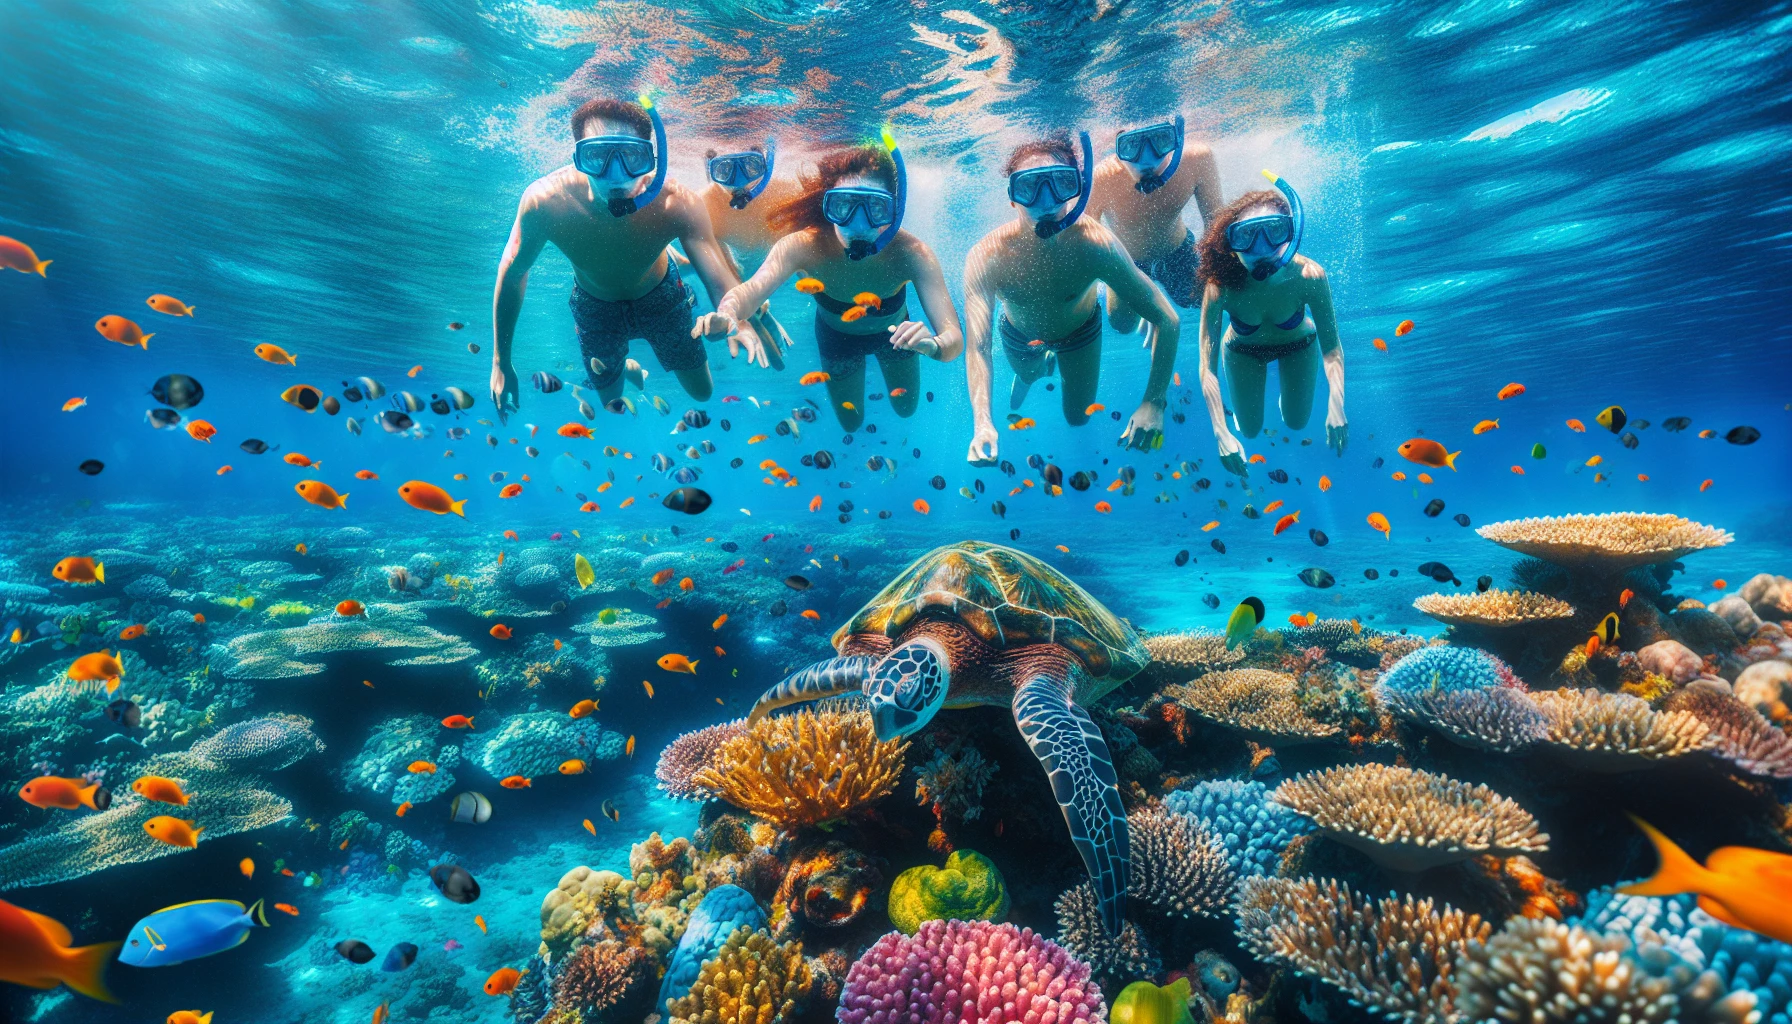 Snorkeling in the crystal-clear waters of Playa Brasilito